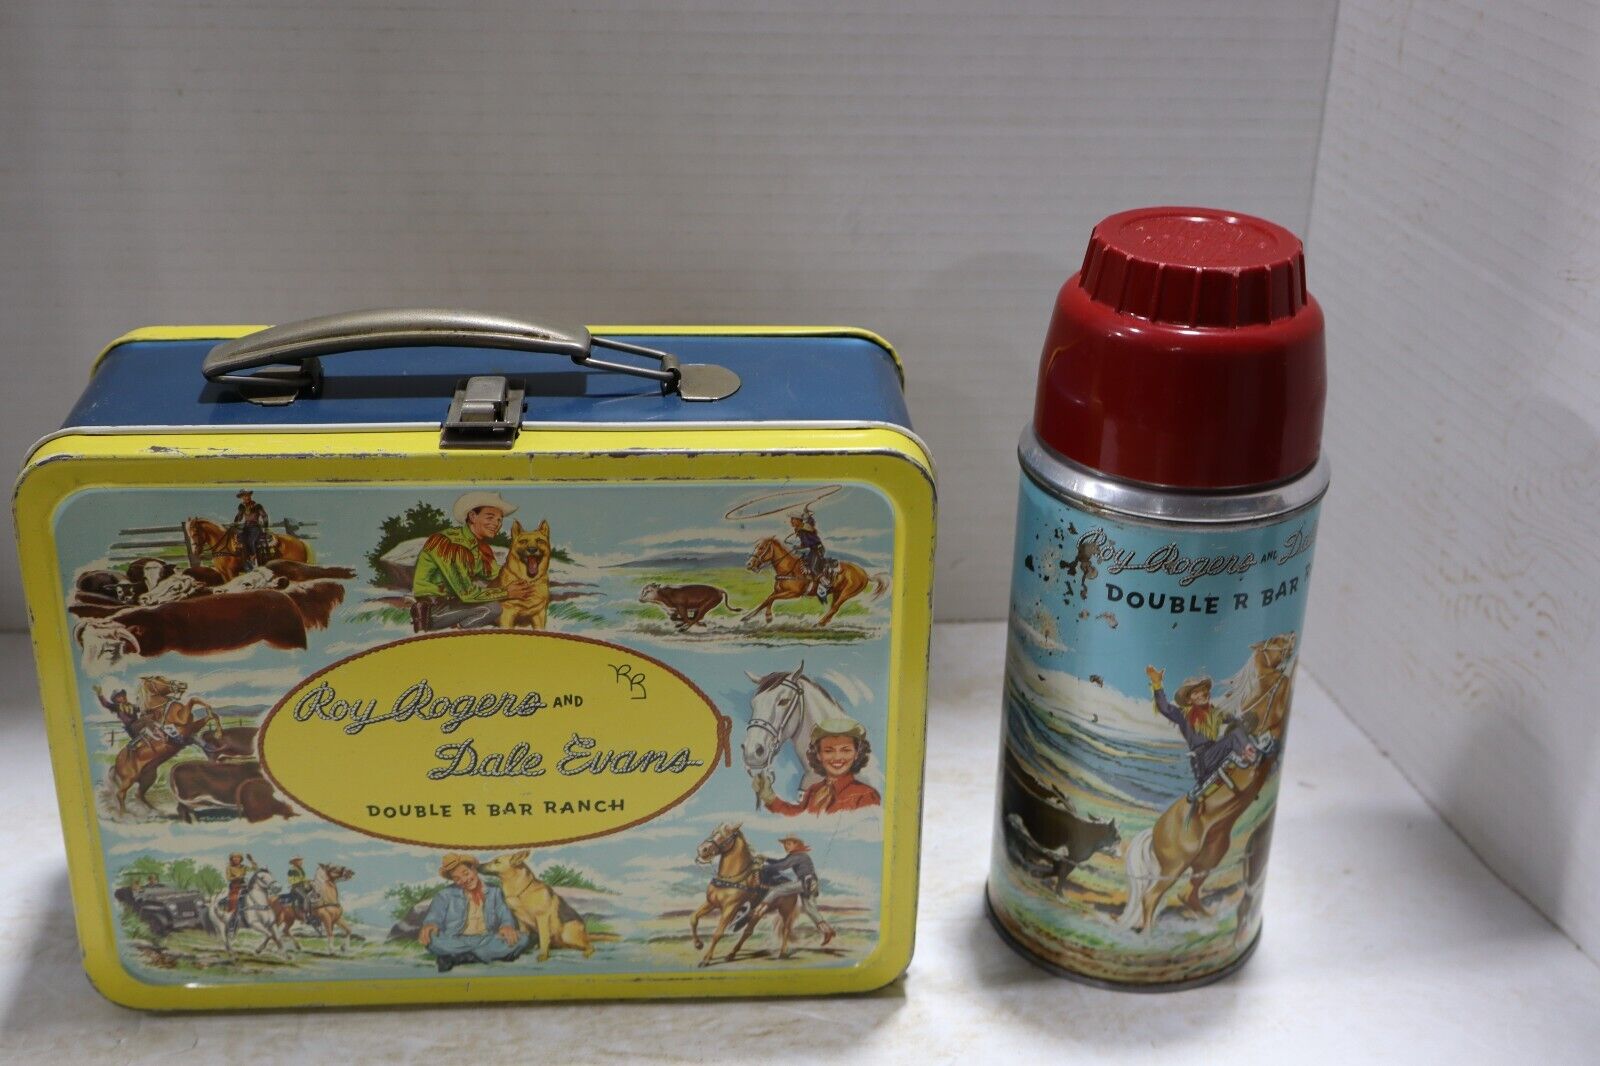 Roy Rogers and Dale Evans Metal double R bar ranch Lunch box BLUE SIDE